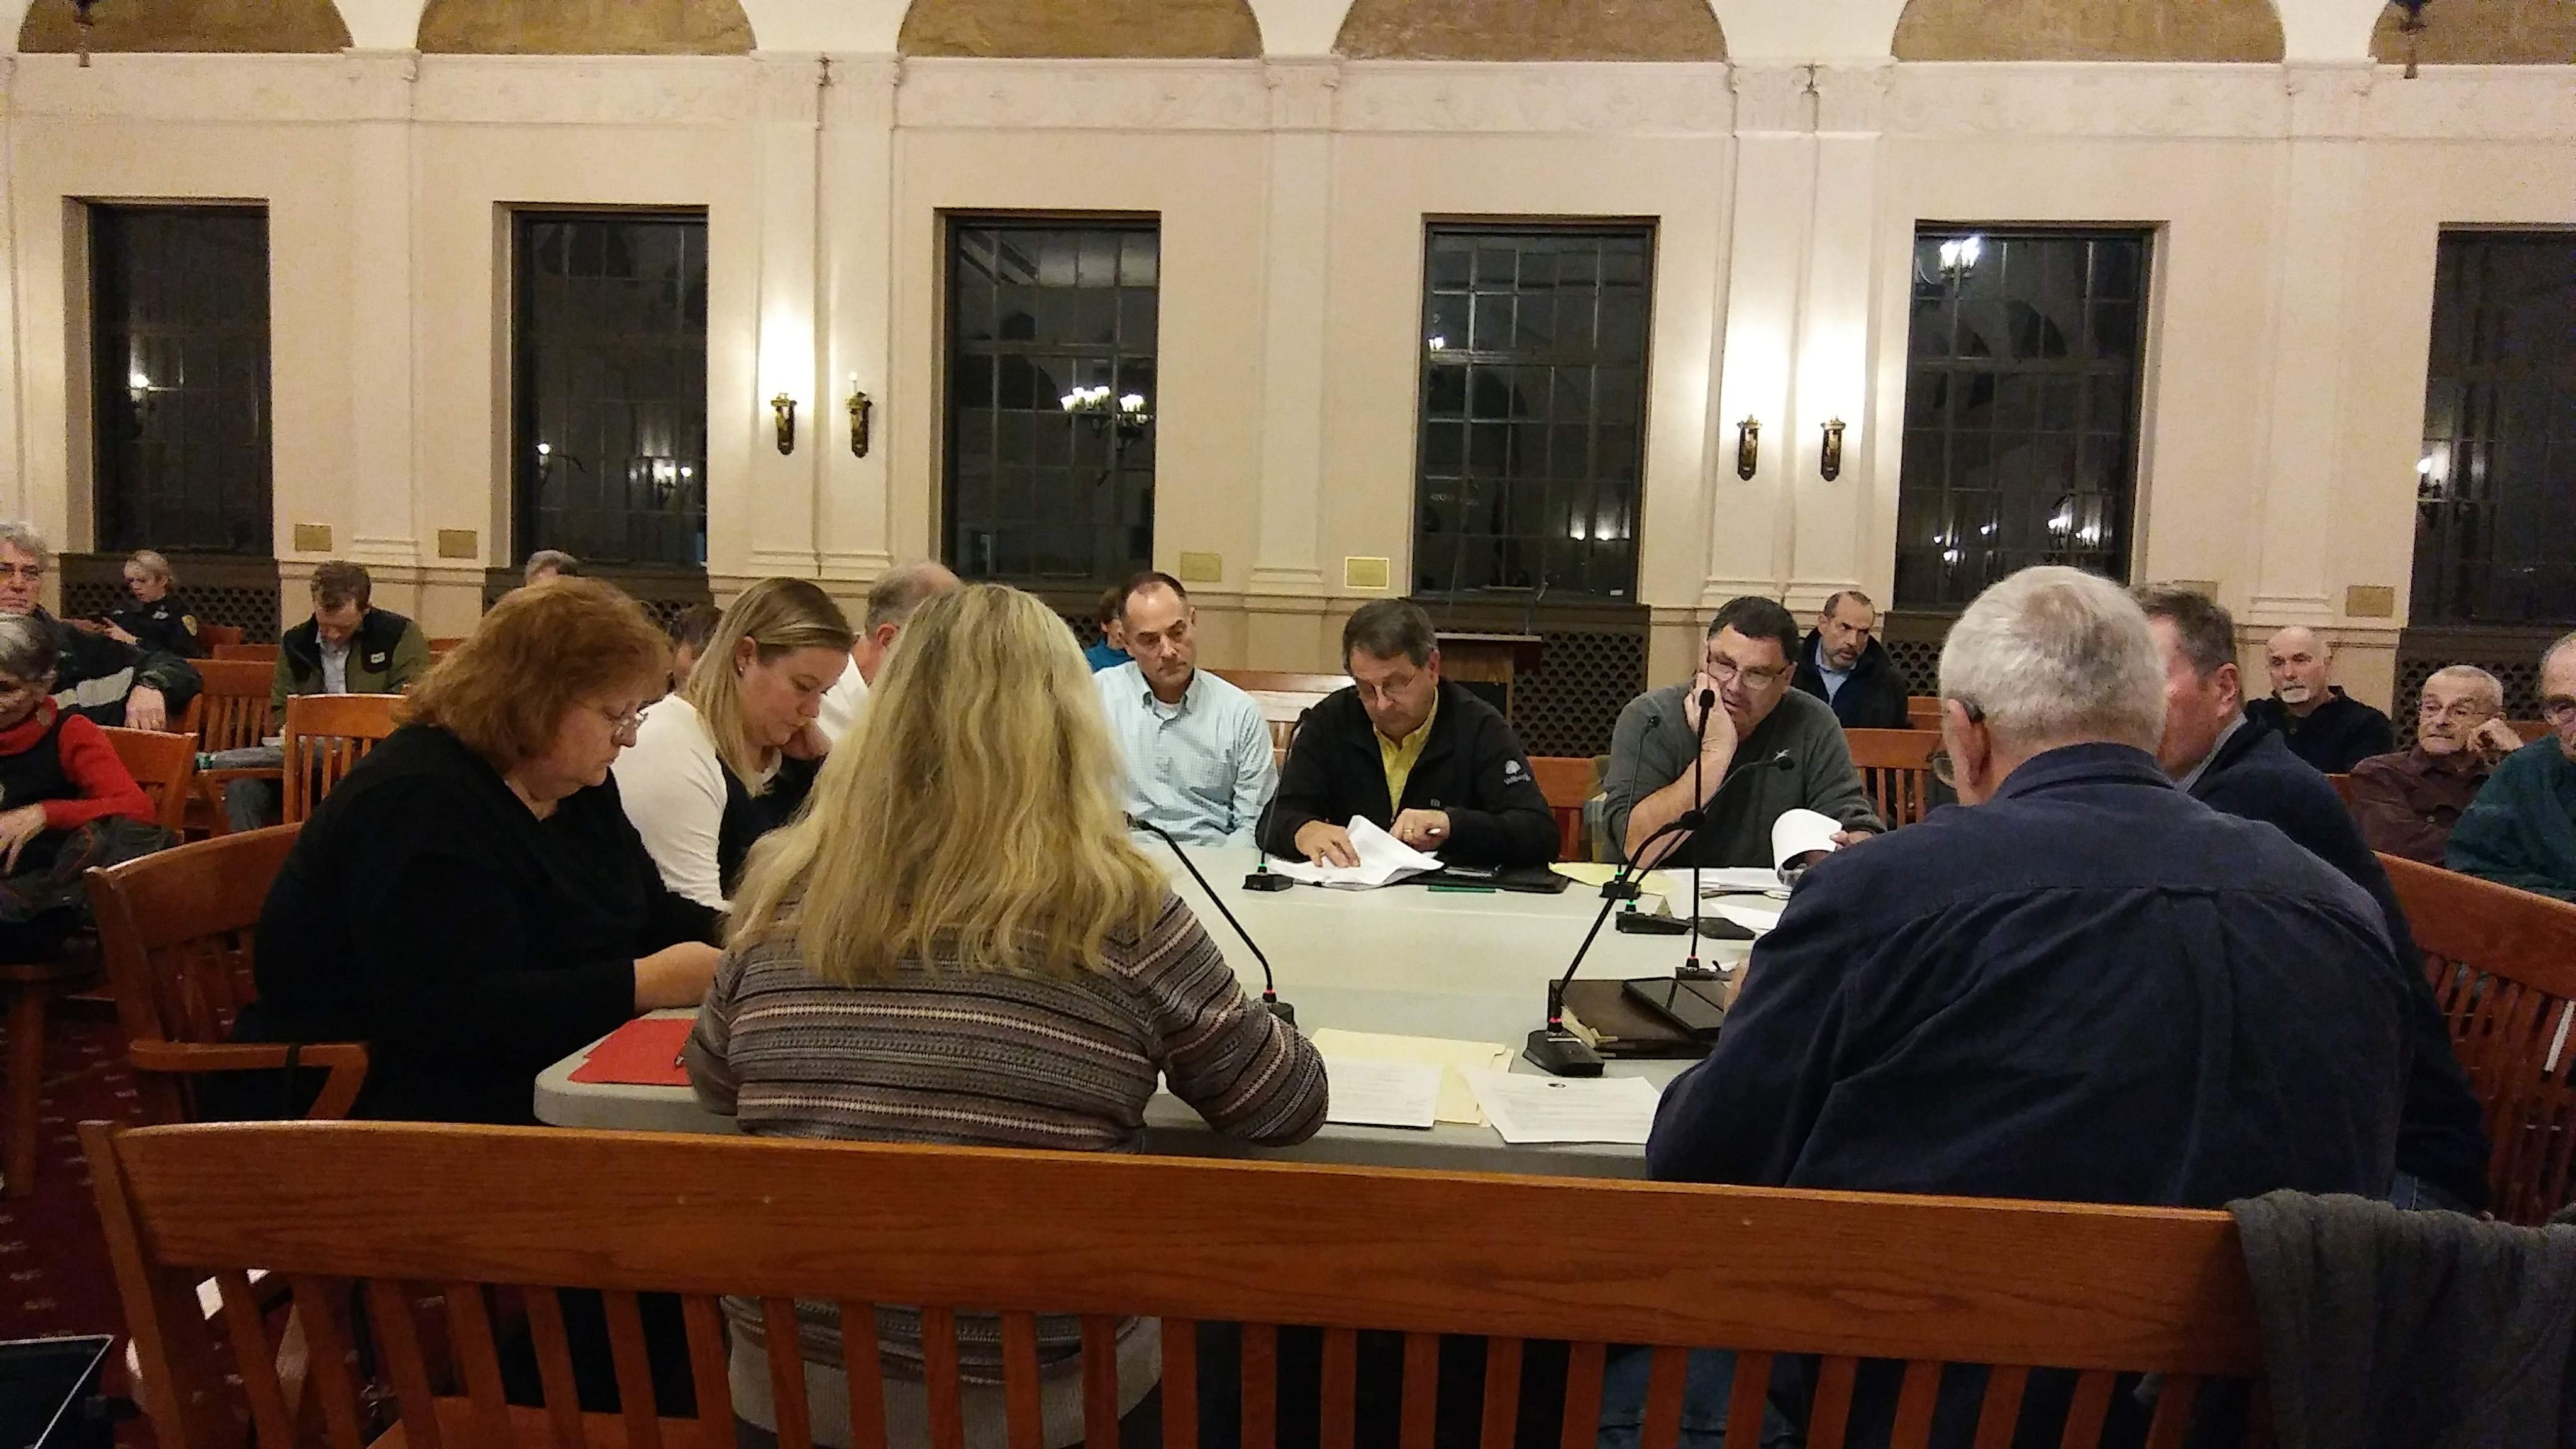 Kingstonian Review Update: SEQR Determination of Significance Tabled, Citizens Surveilled During Meeting